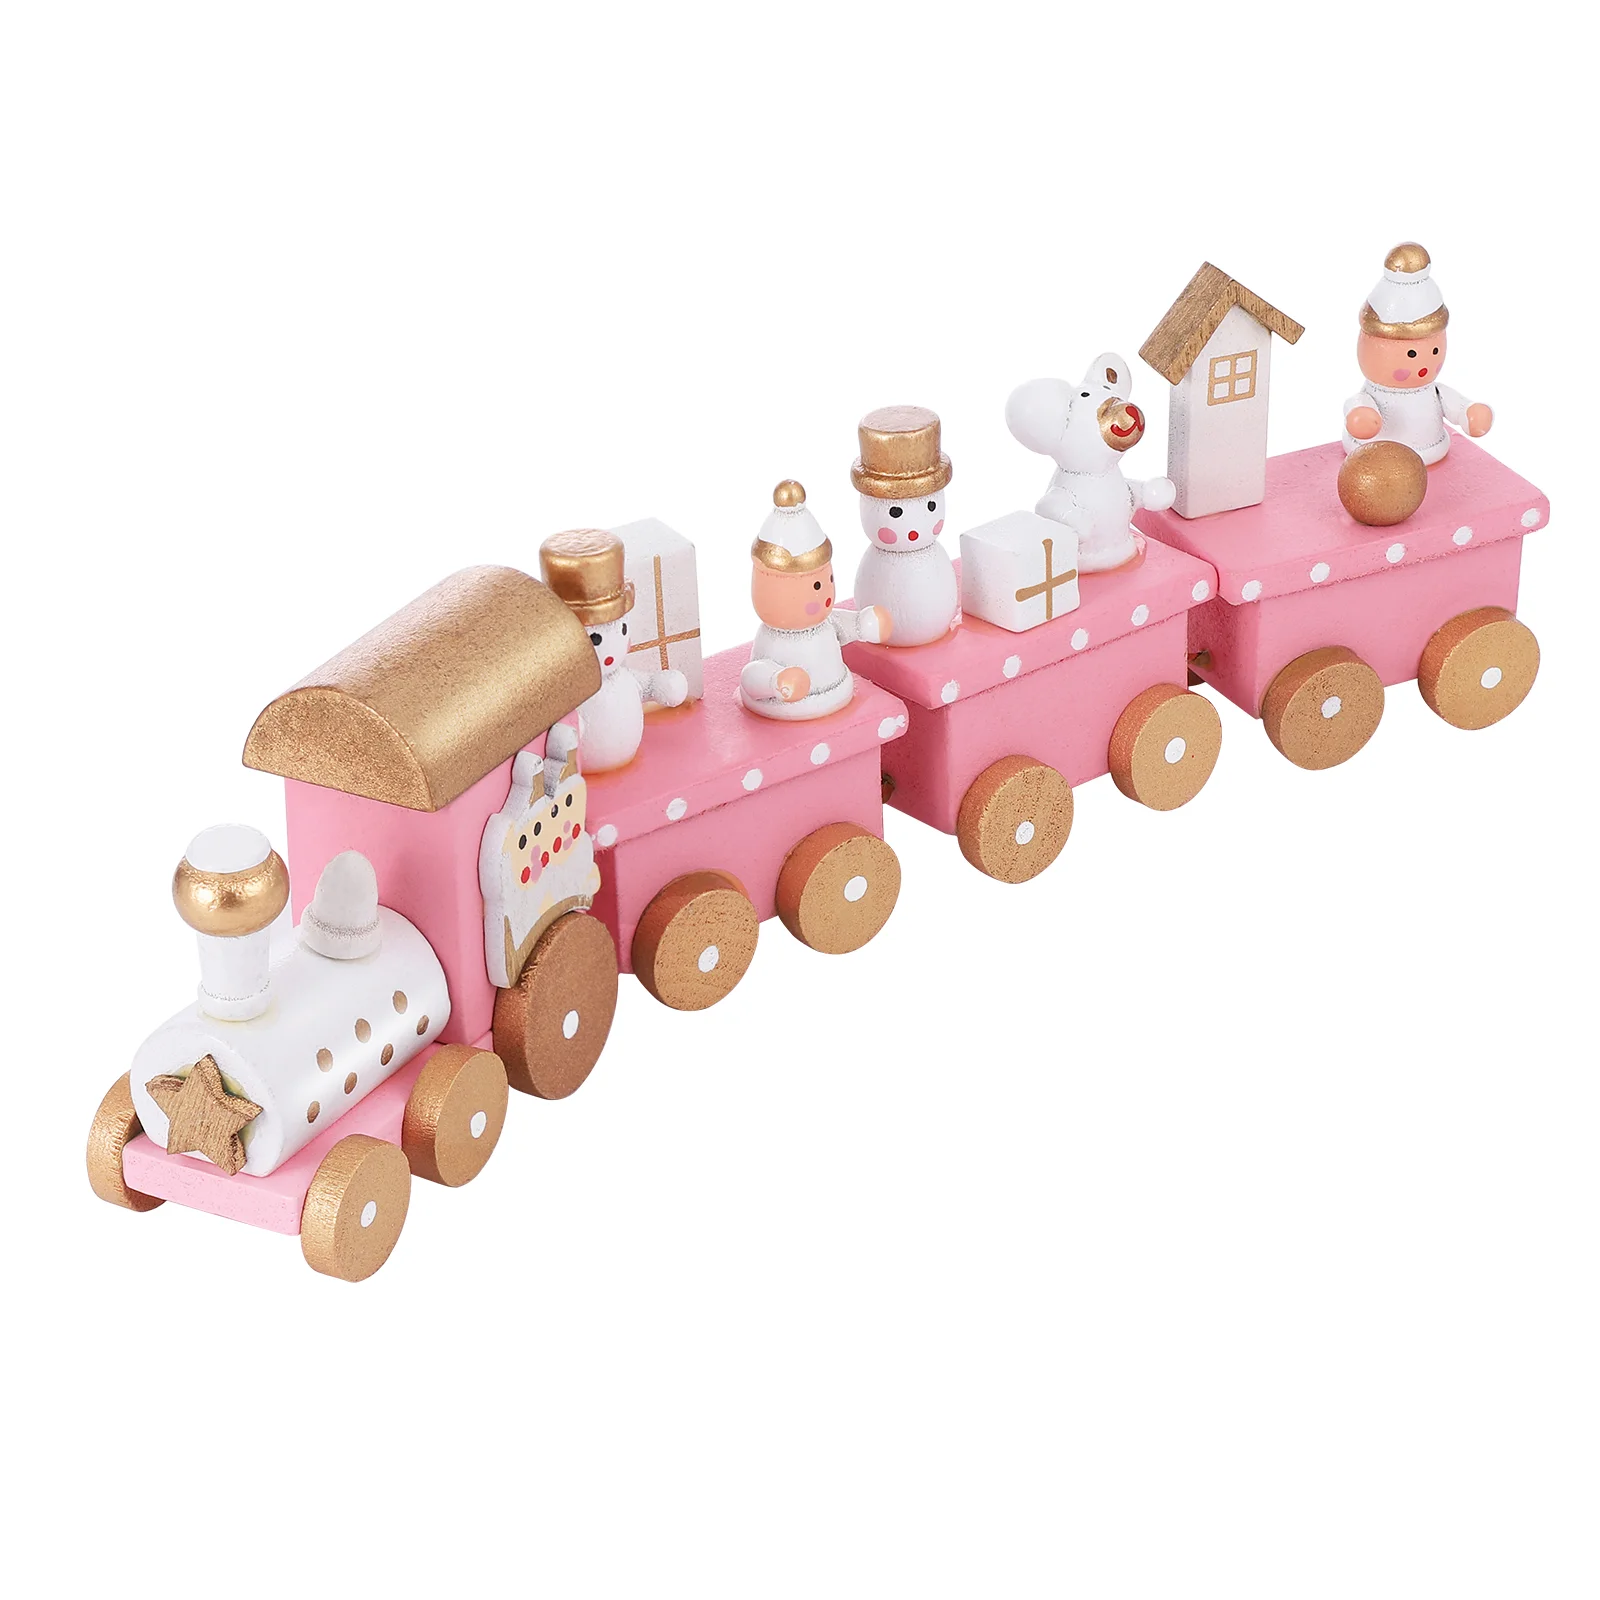 Wooden Train Dining Table Decor Toy for Kids Xmas Small Mini Playing Christmas Toddler Desktop